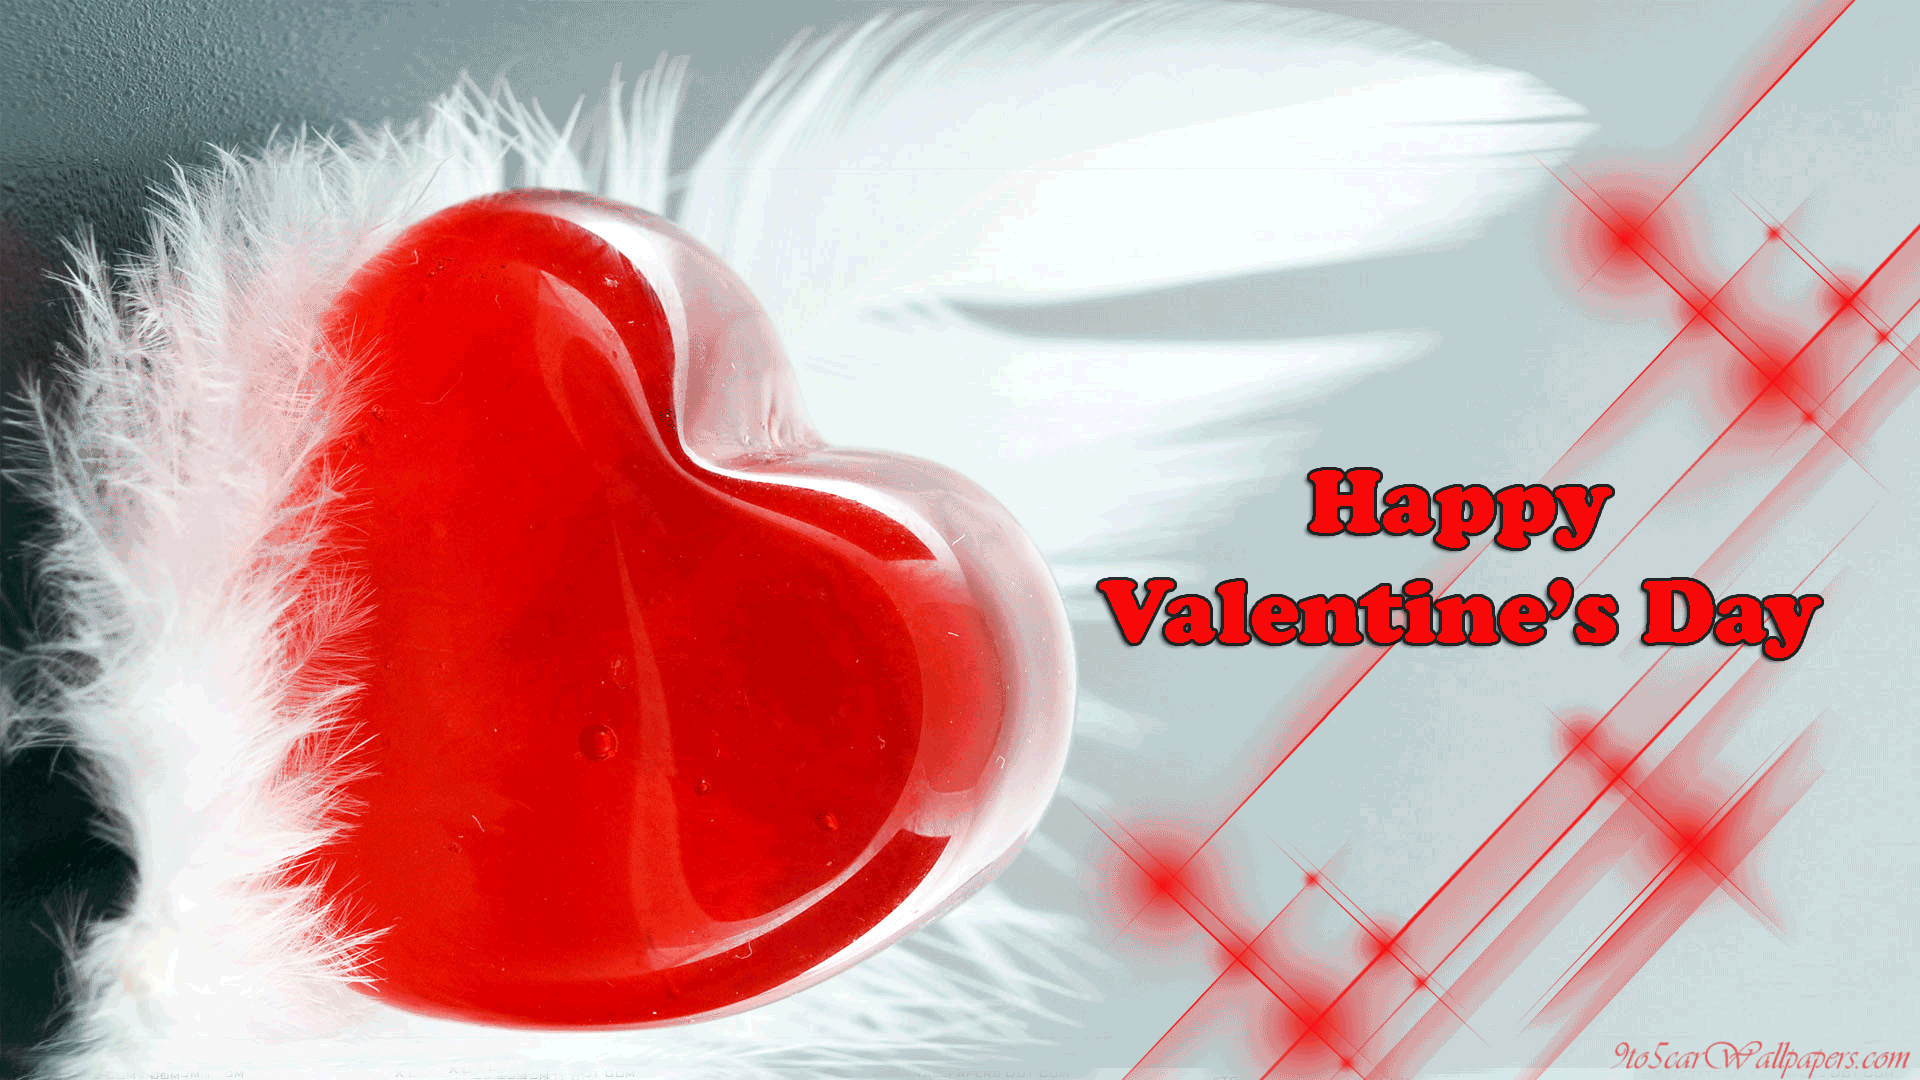 Happy Valentines Day Animated GIF| Animated Heart GIF - 9to5 Car Wallpapers